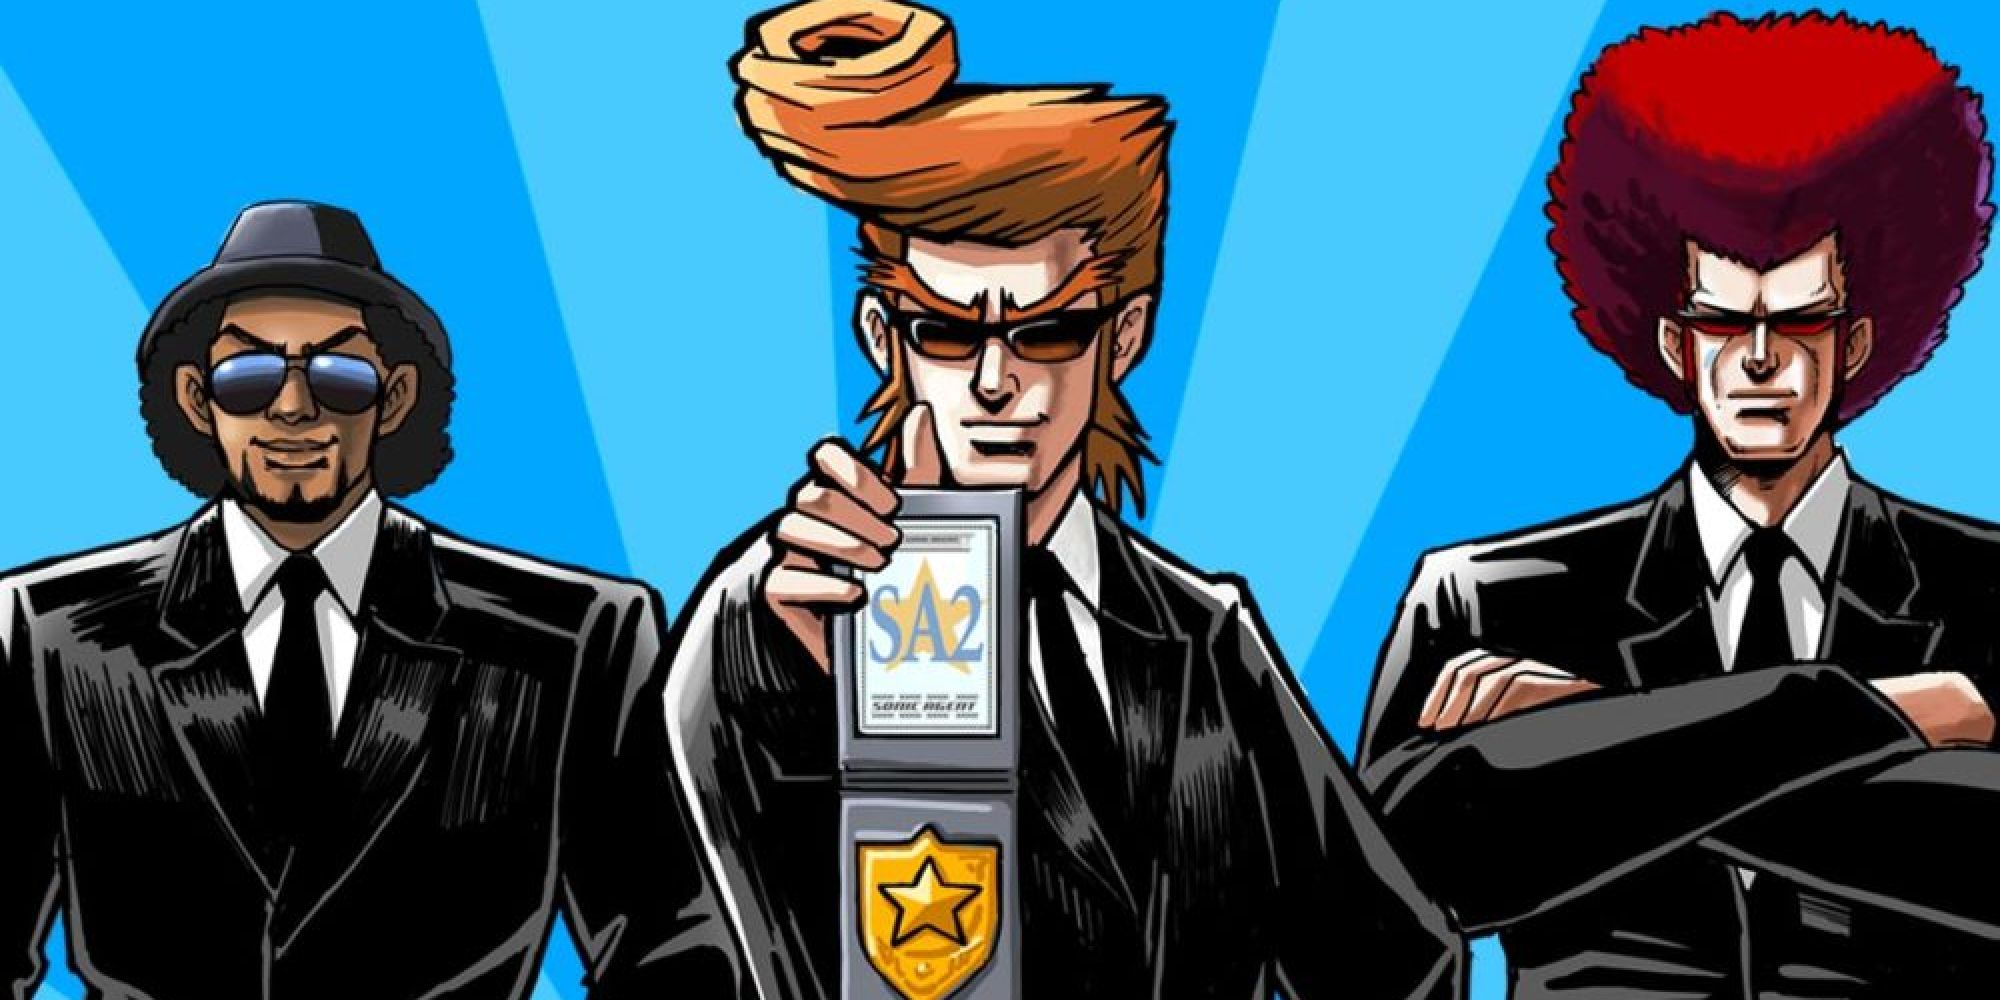 The three Elite Beat Agents appearing in promo art for the DS game